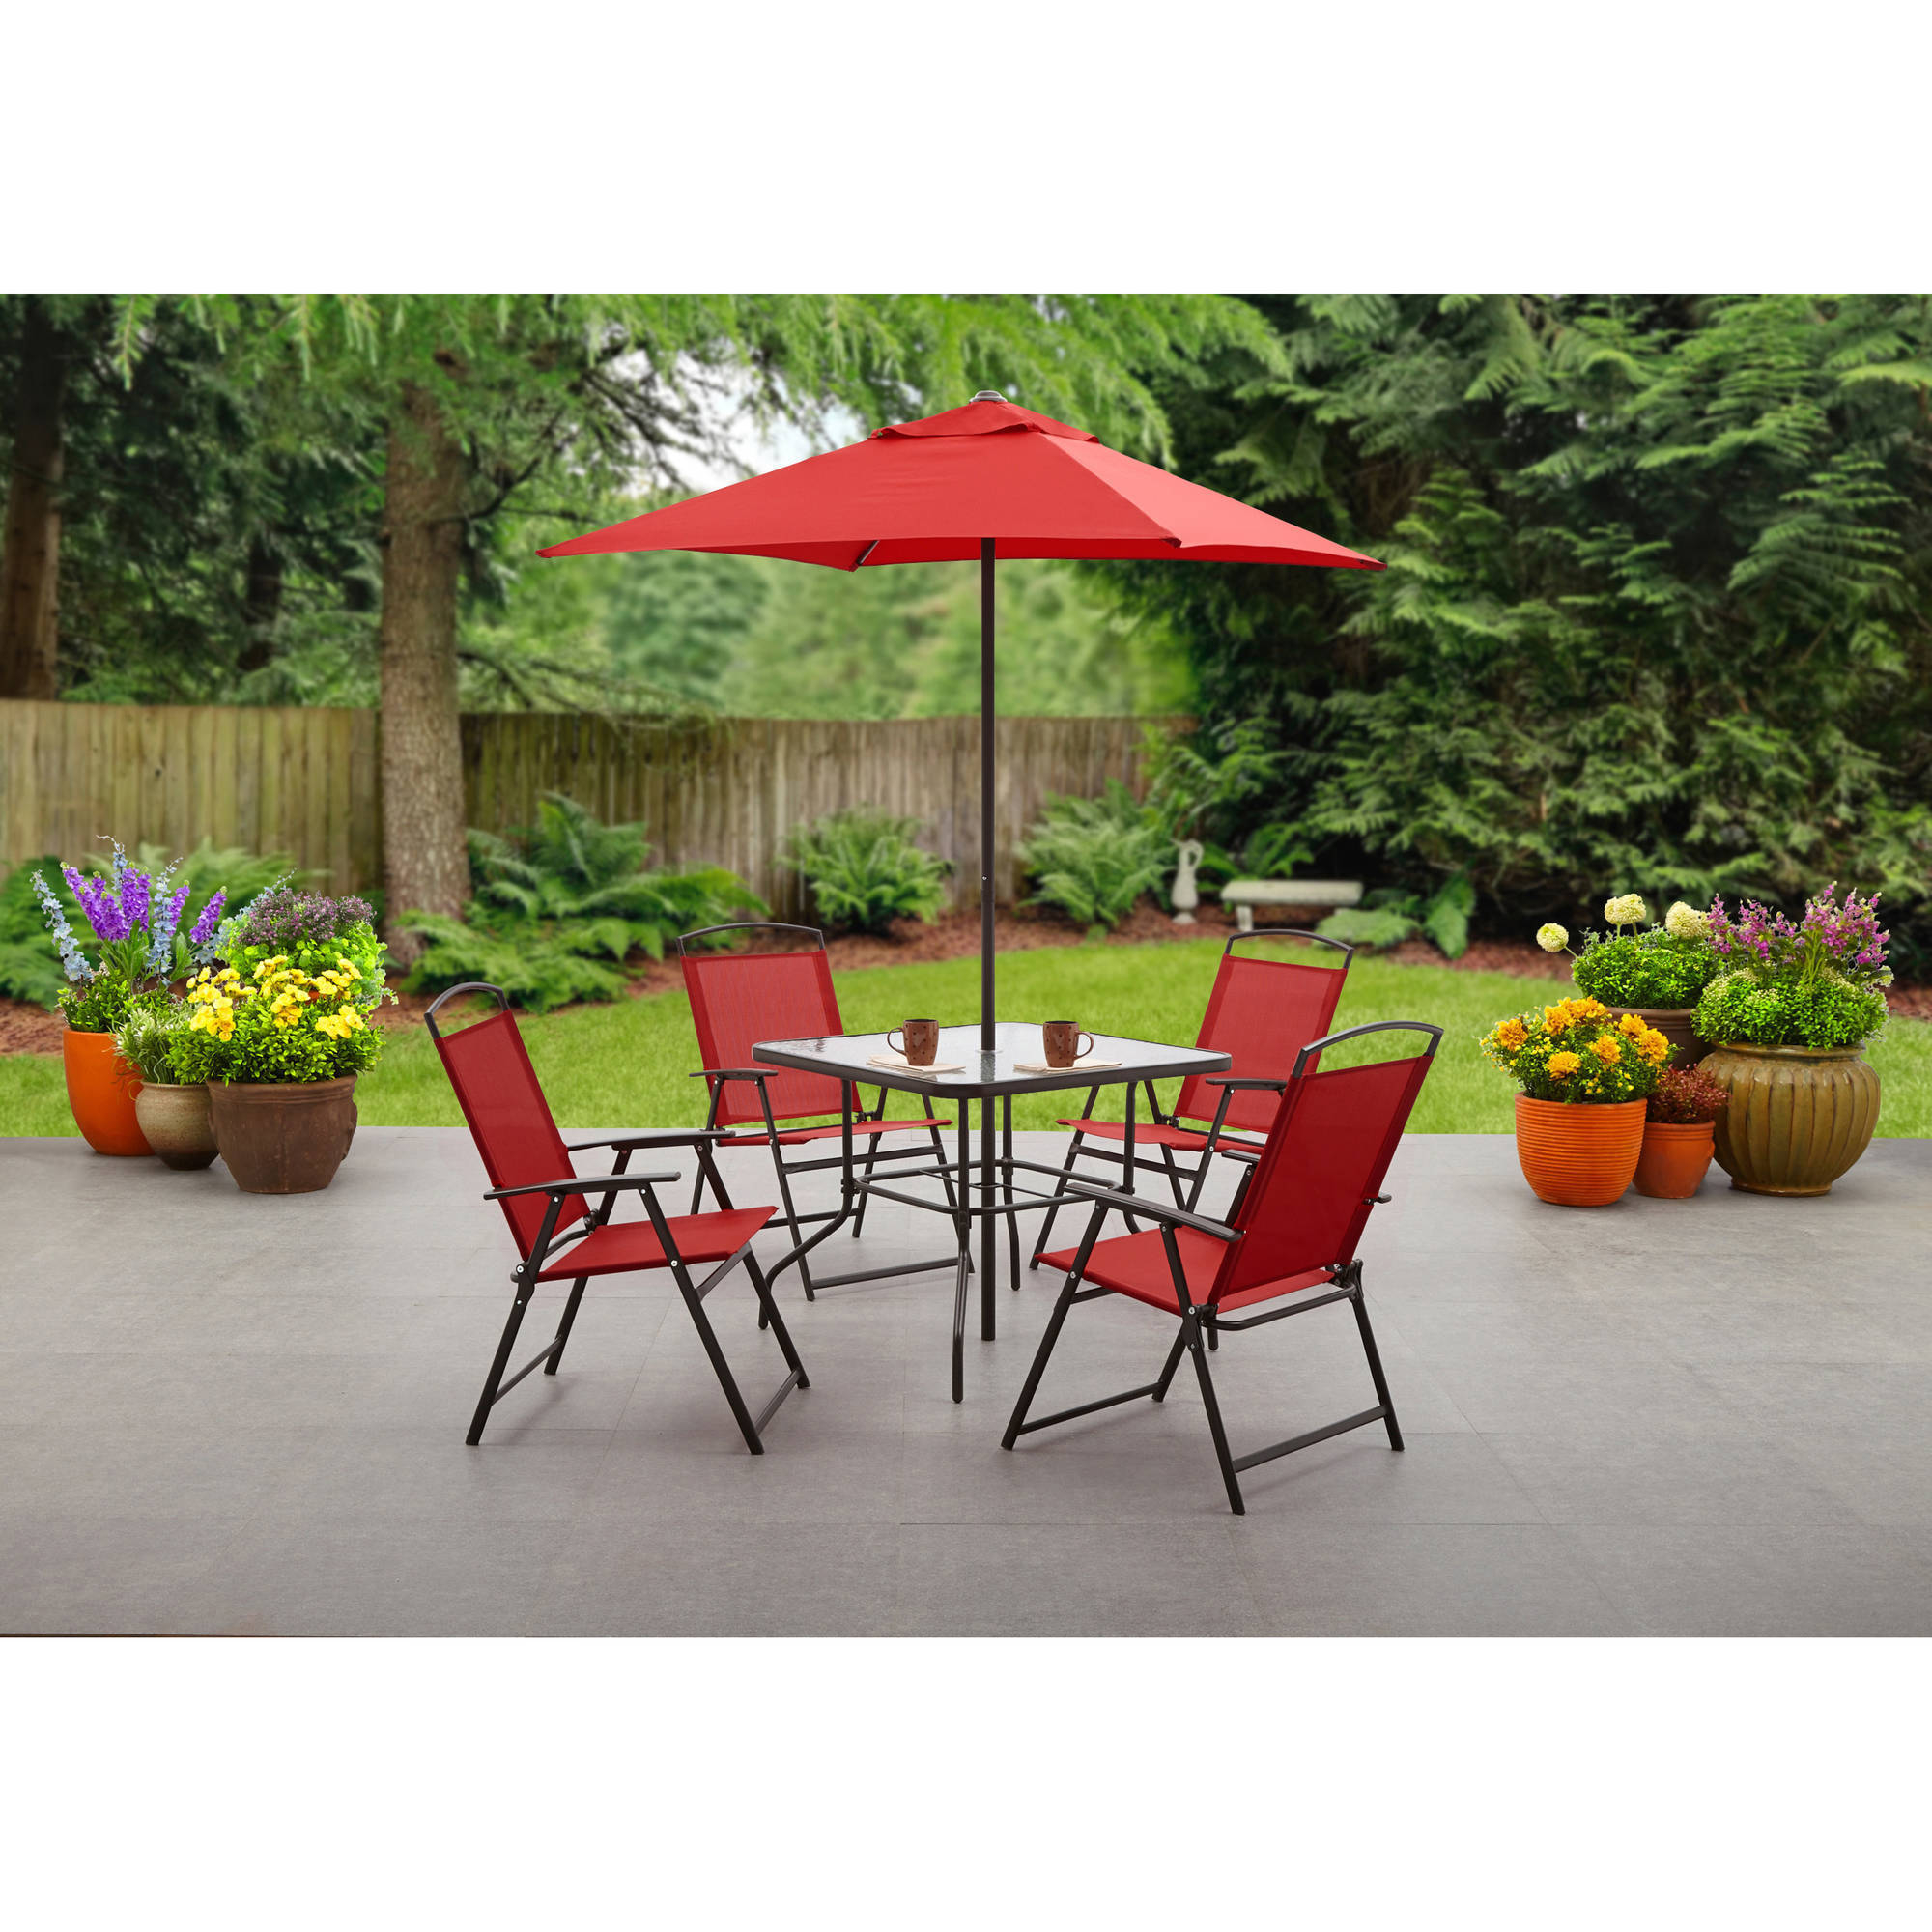 Mainstays Albany Lane 6 Piece Outdoor Patio Dining Set Multiple Colors Walmart in measurements 2000 X 2000